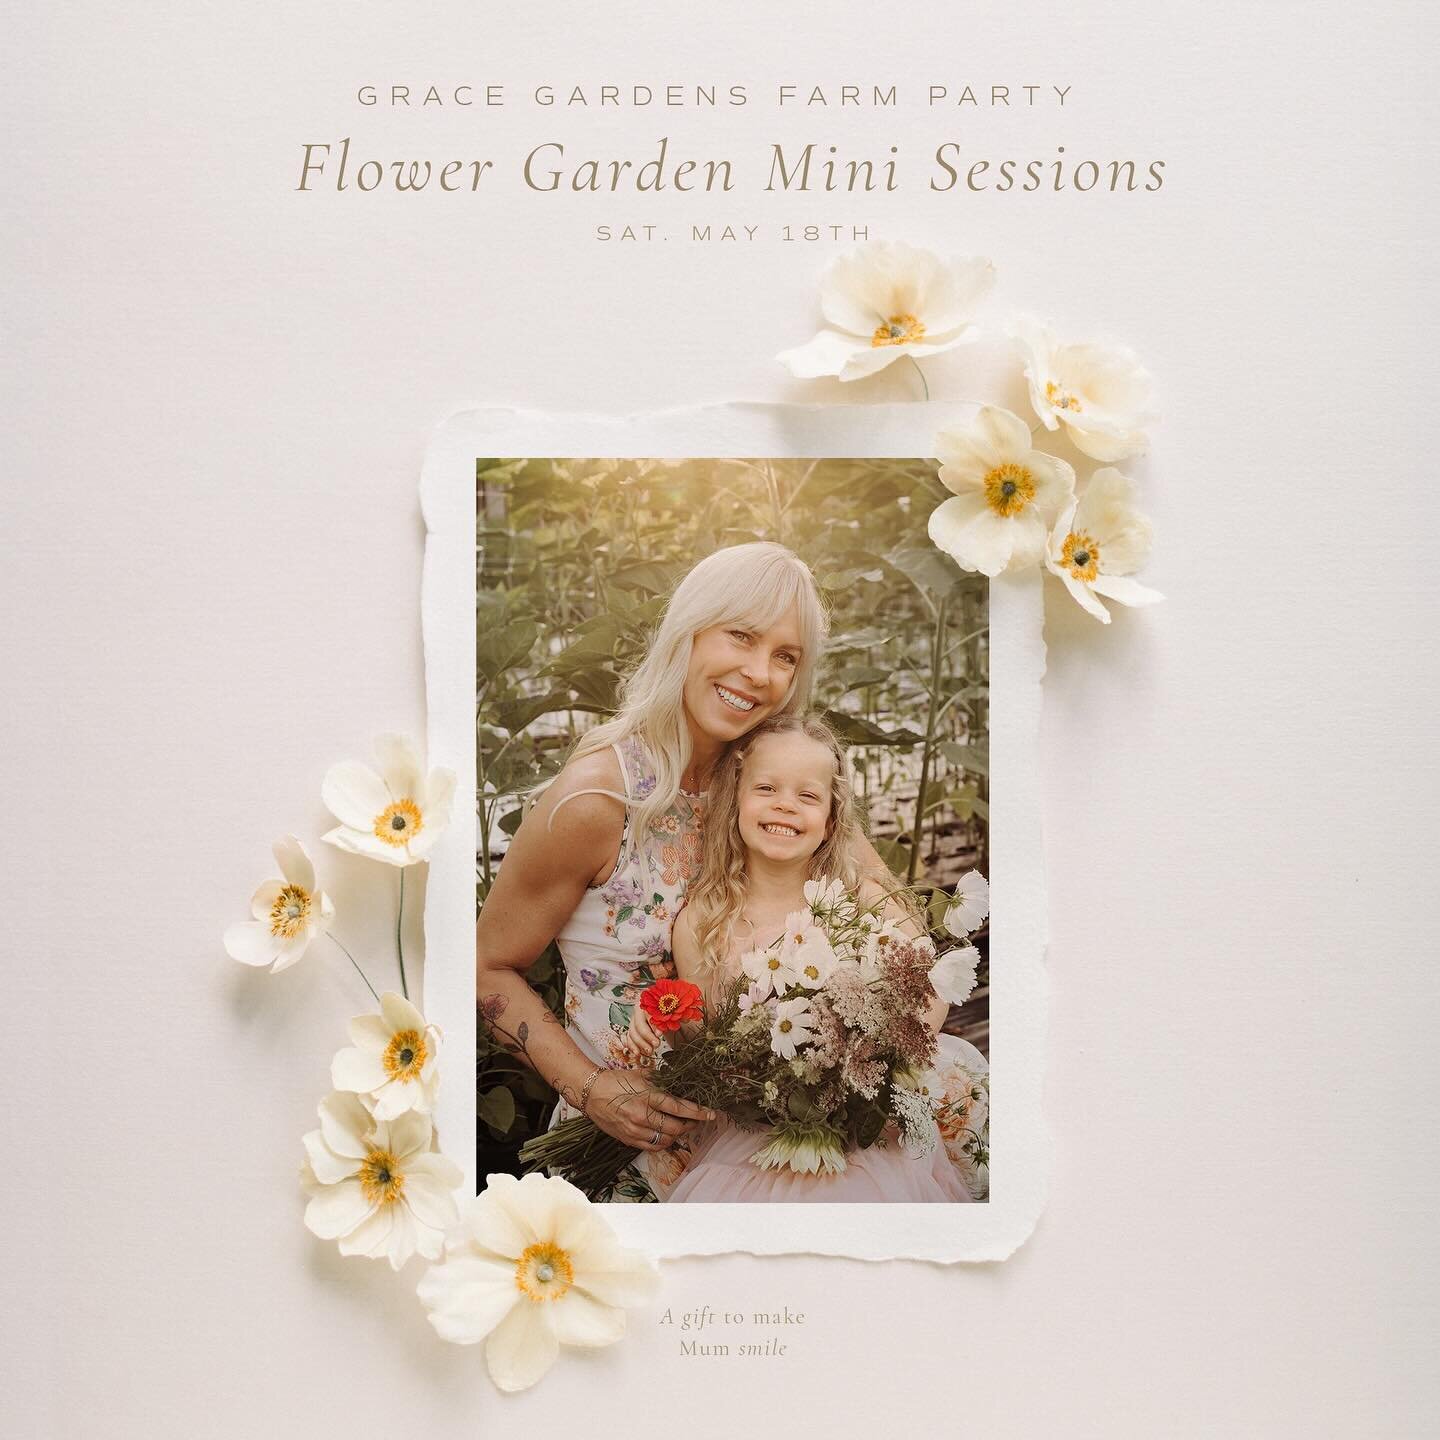 Flower Garden Mini Sessions are live! 🪴 
Shop link in profile to secure your session spot. 
Hope you can join us on May 18th for a fun collaboration with @gracegardensfloral at her Farm Garden Party! Check out her page to RSVP too. 💐